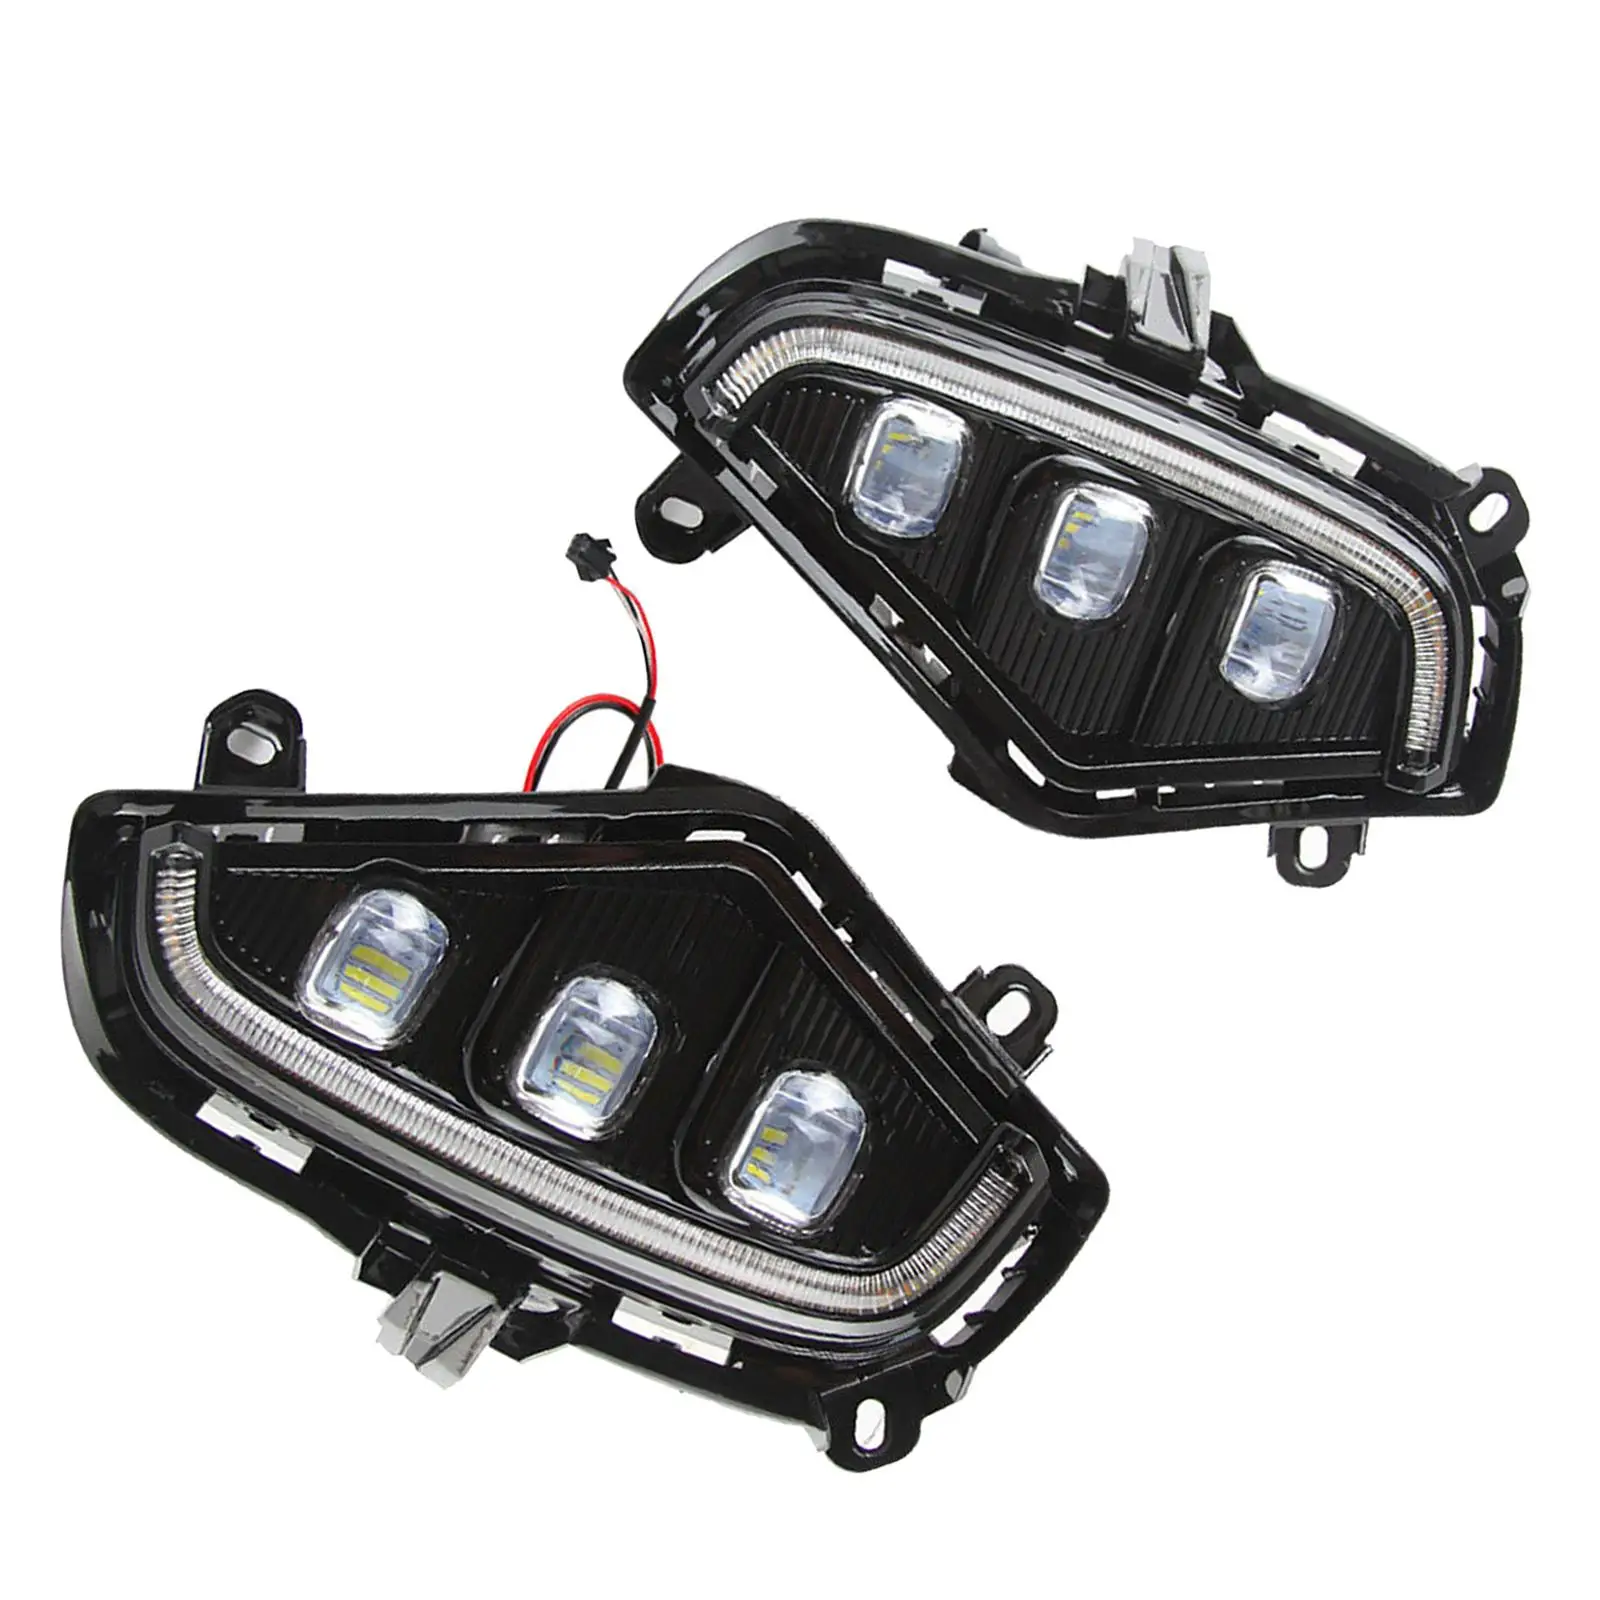 2x LED Daytime Running Light Acrylic Fog Lamps Fit for Replacement Accessories